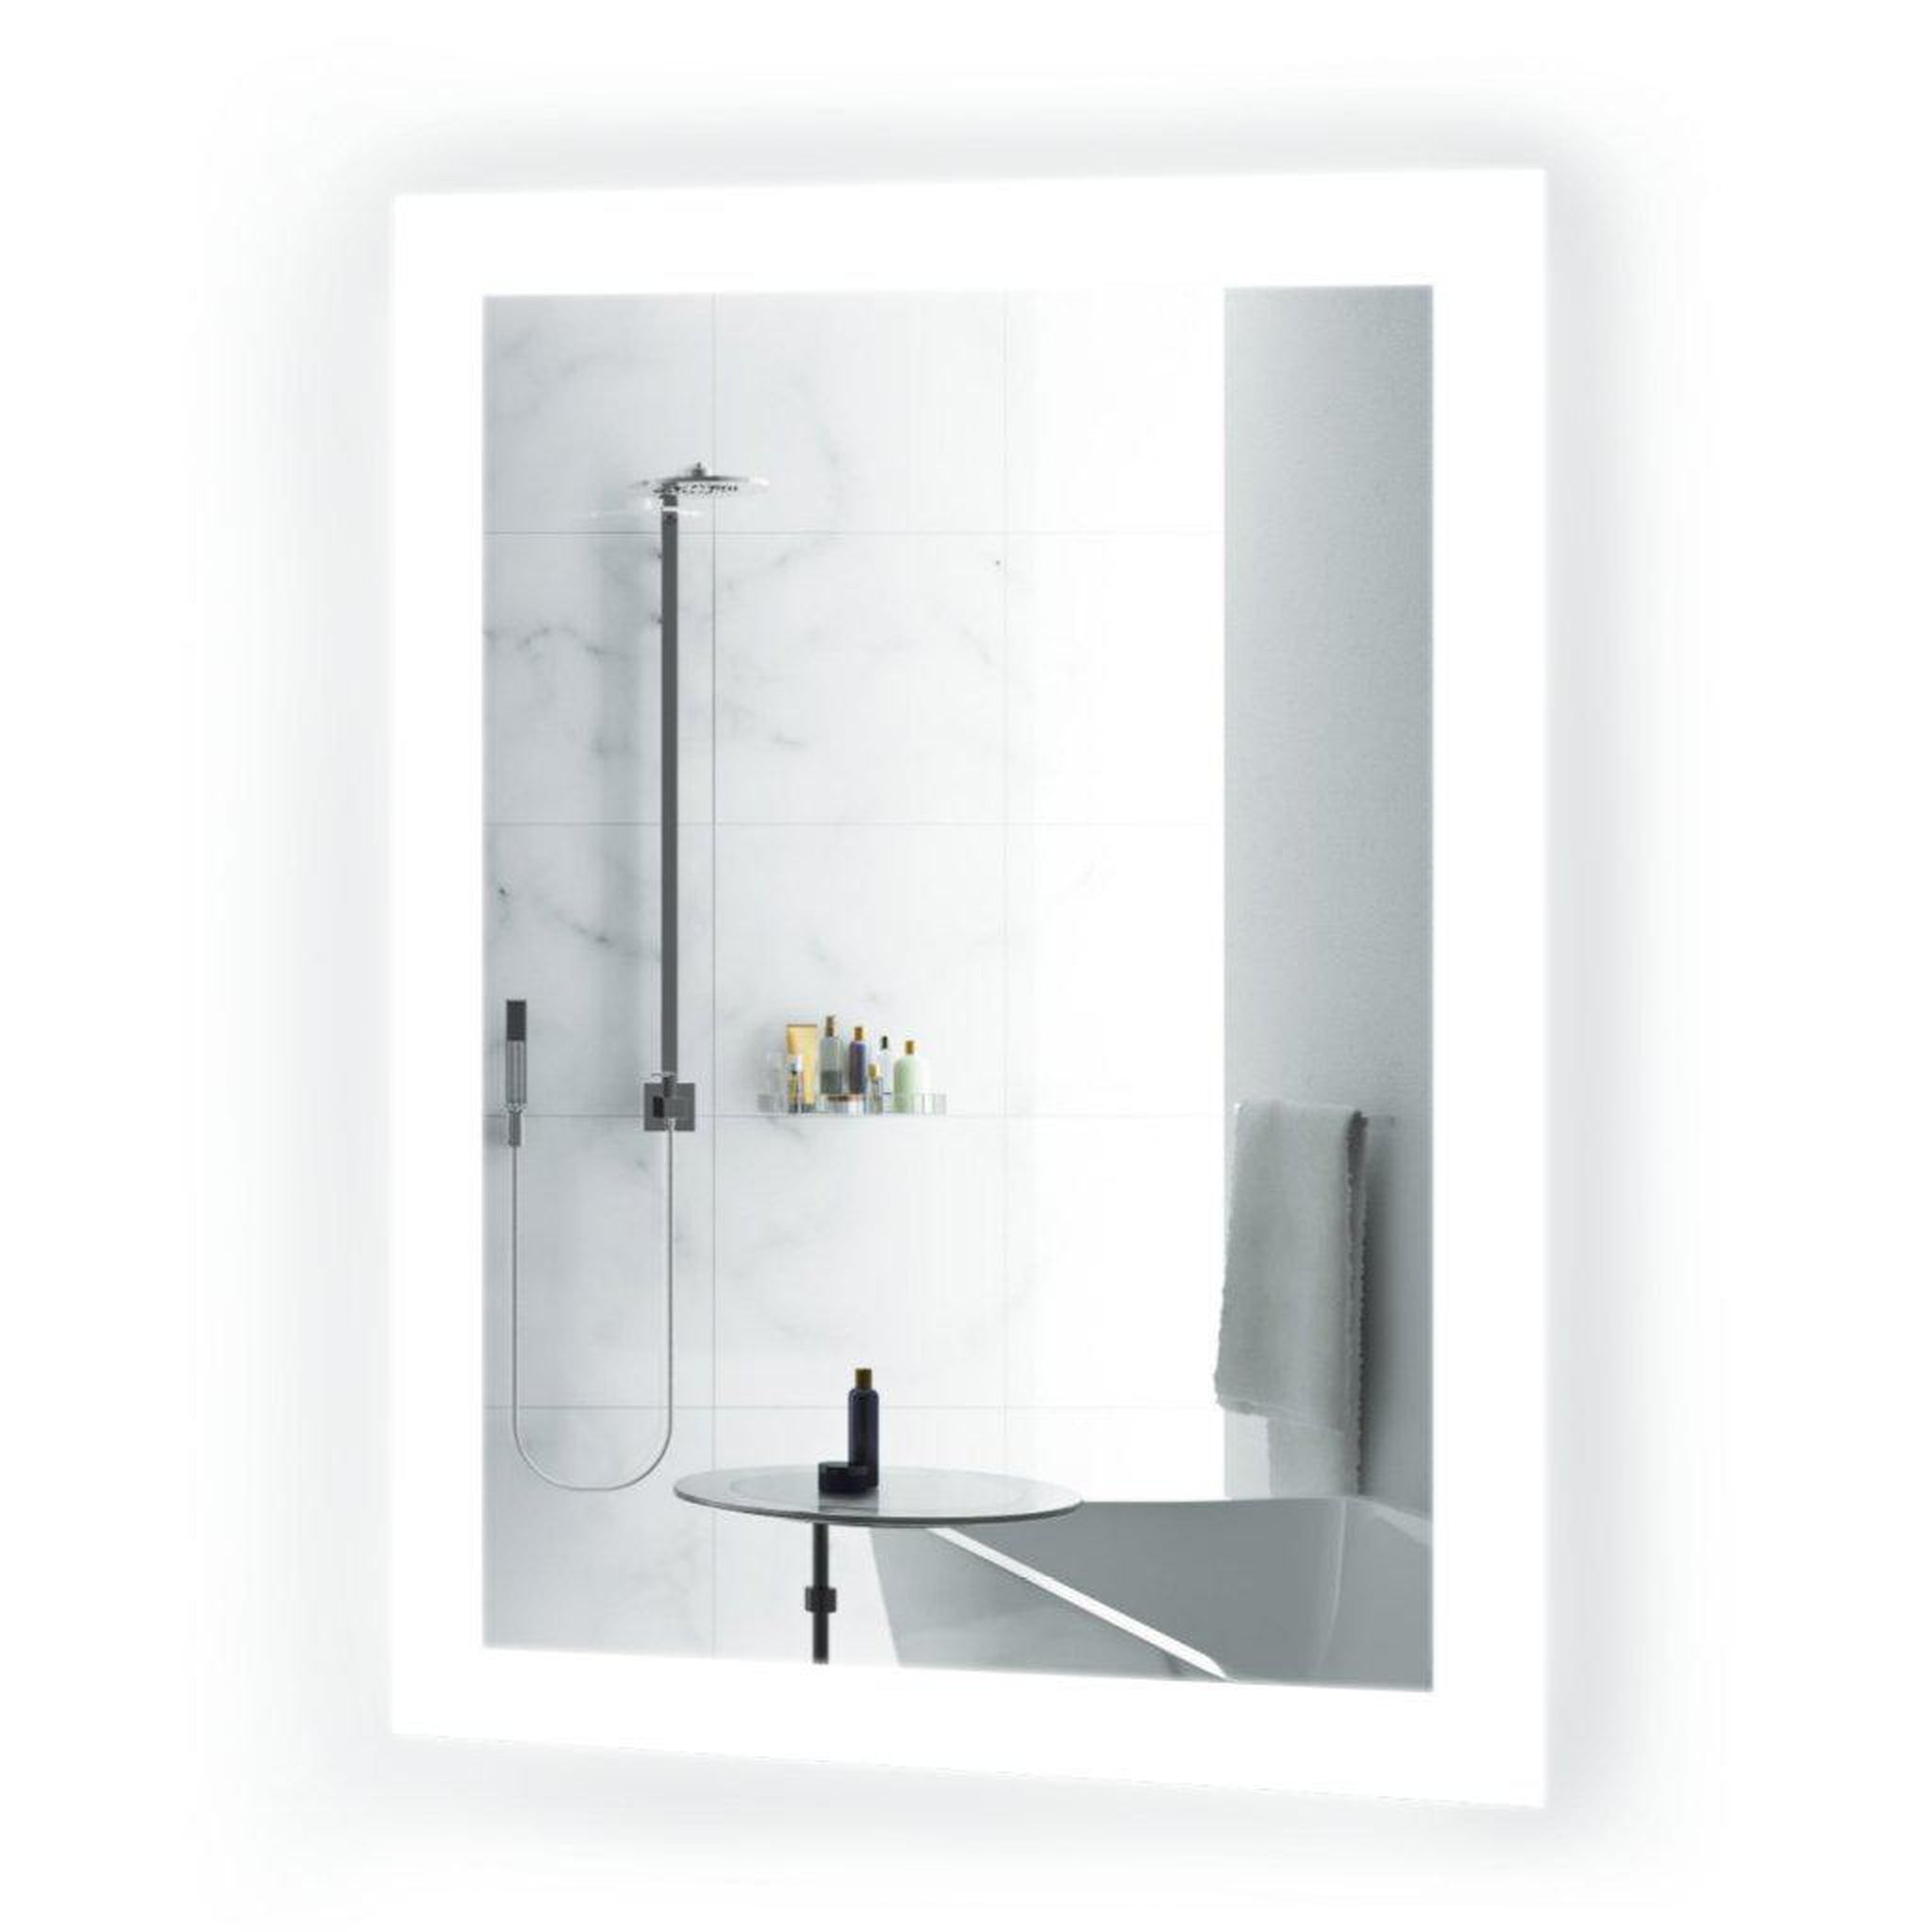 Krugg Reflections, Krugg Reflections Bijou 15" x 20" Small Rectangular Wall-Mounted 5000K LED Mirror With Built-in Defogger and Dimmer